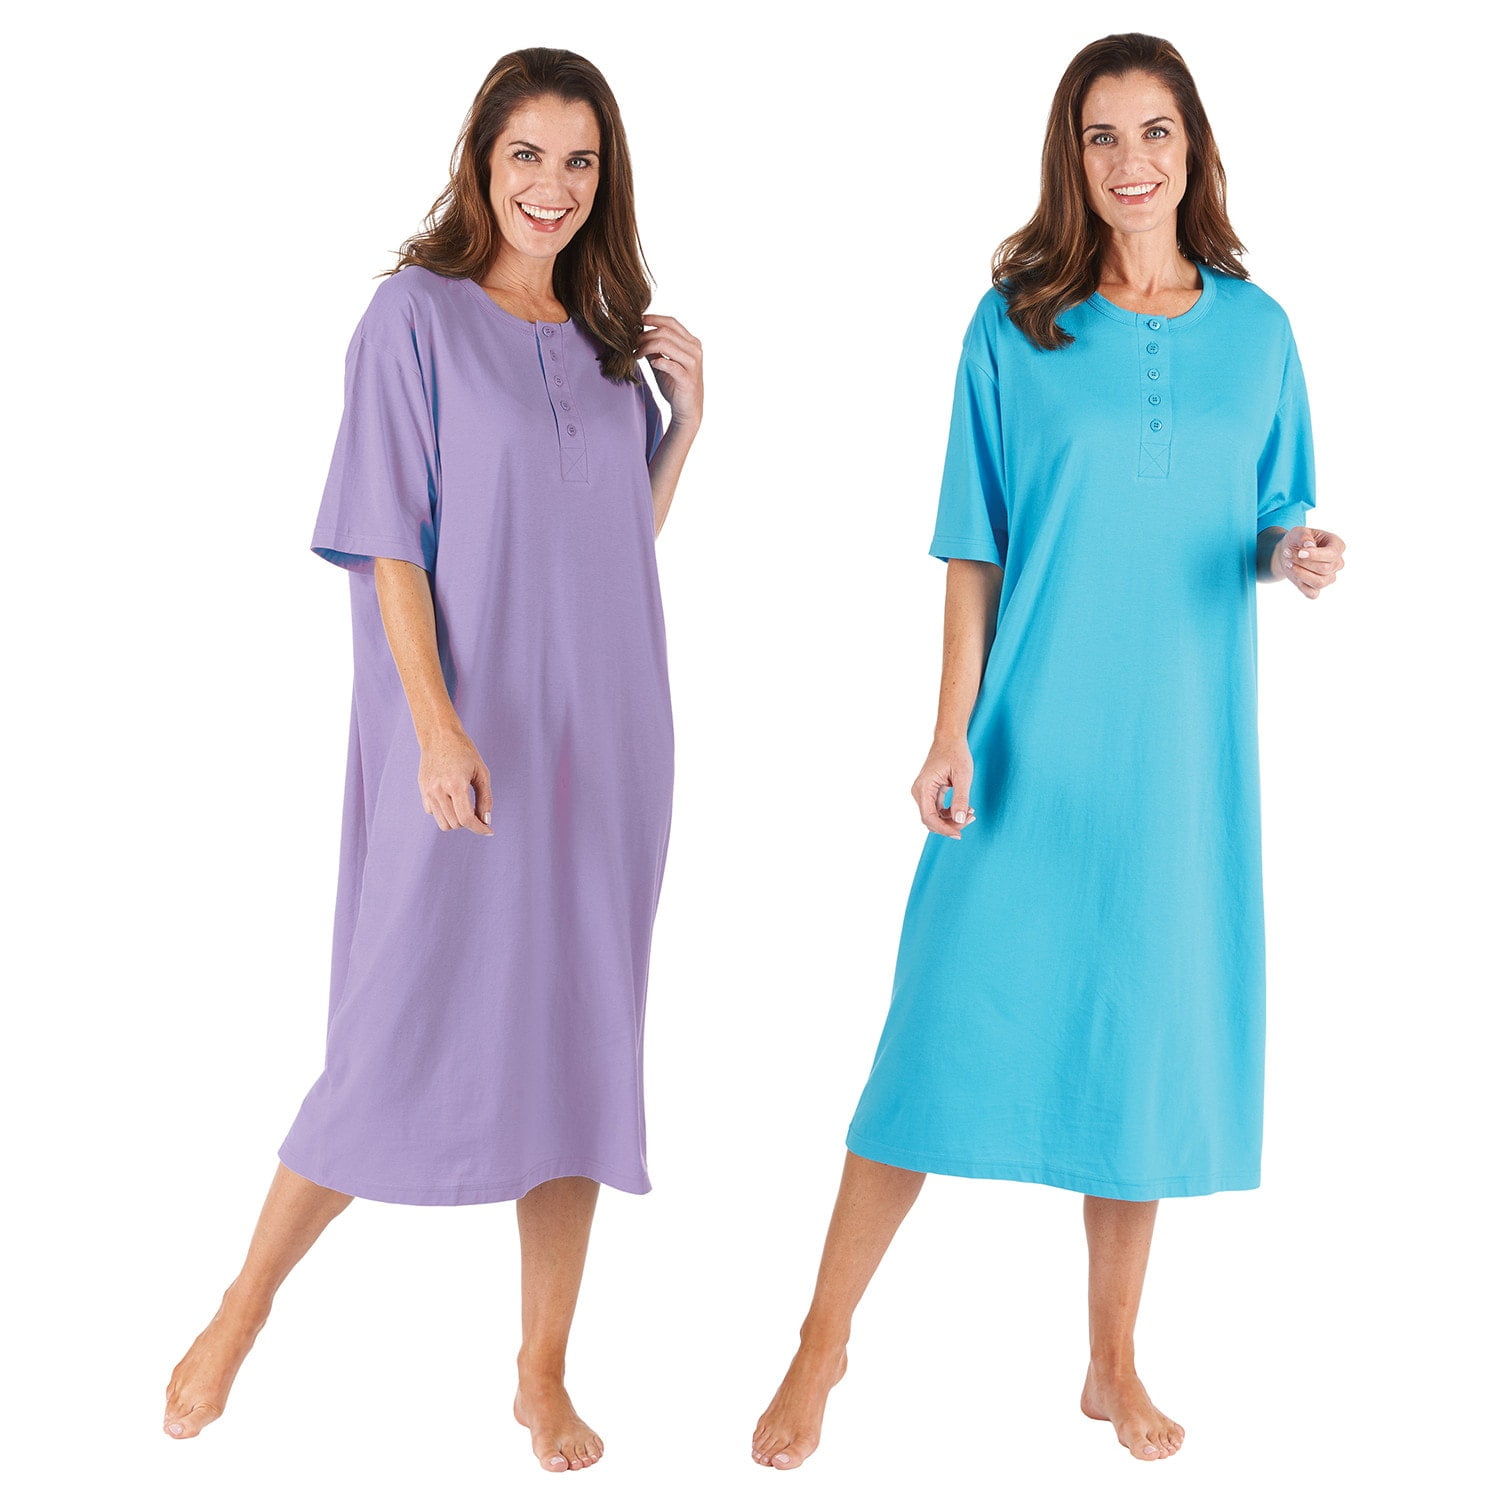 CATALOG CLASSICS Womens Nightgown Henley Night Shirt 100% Cotton Night Gown,  Purple/Turquoise, Missy (8-18), 46L 